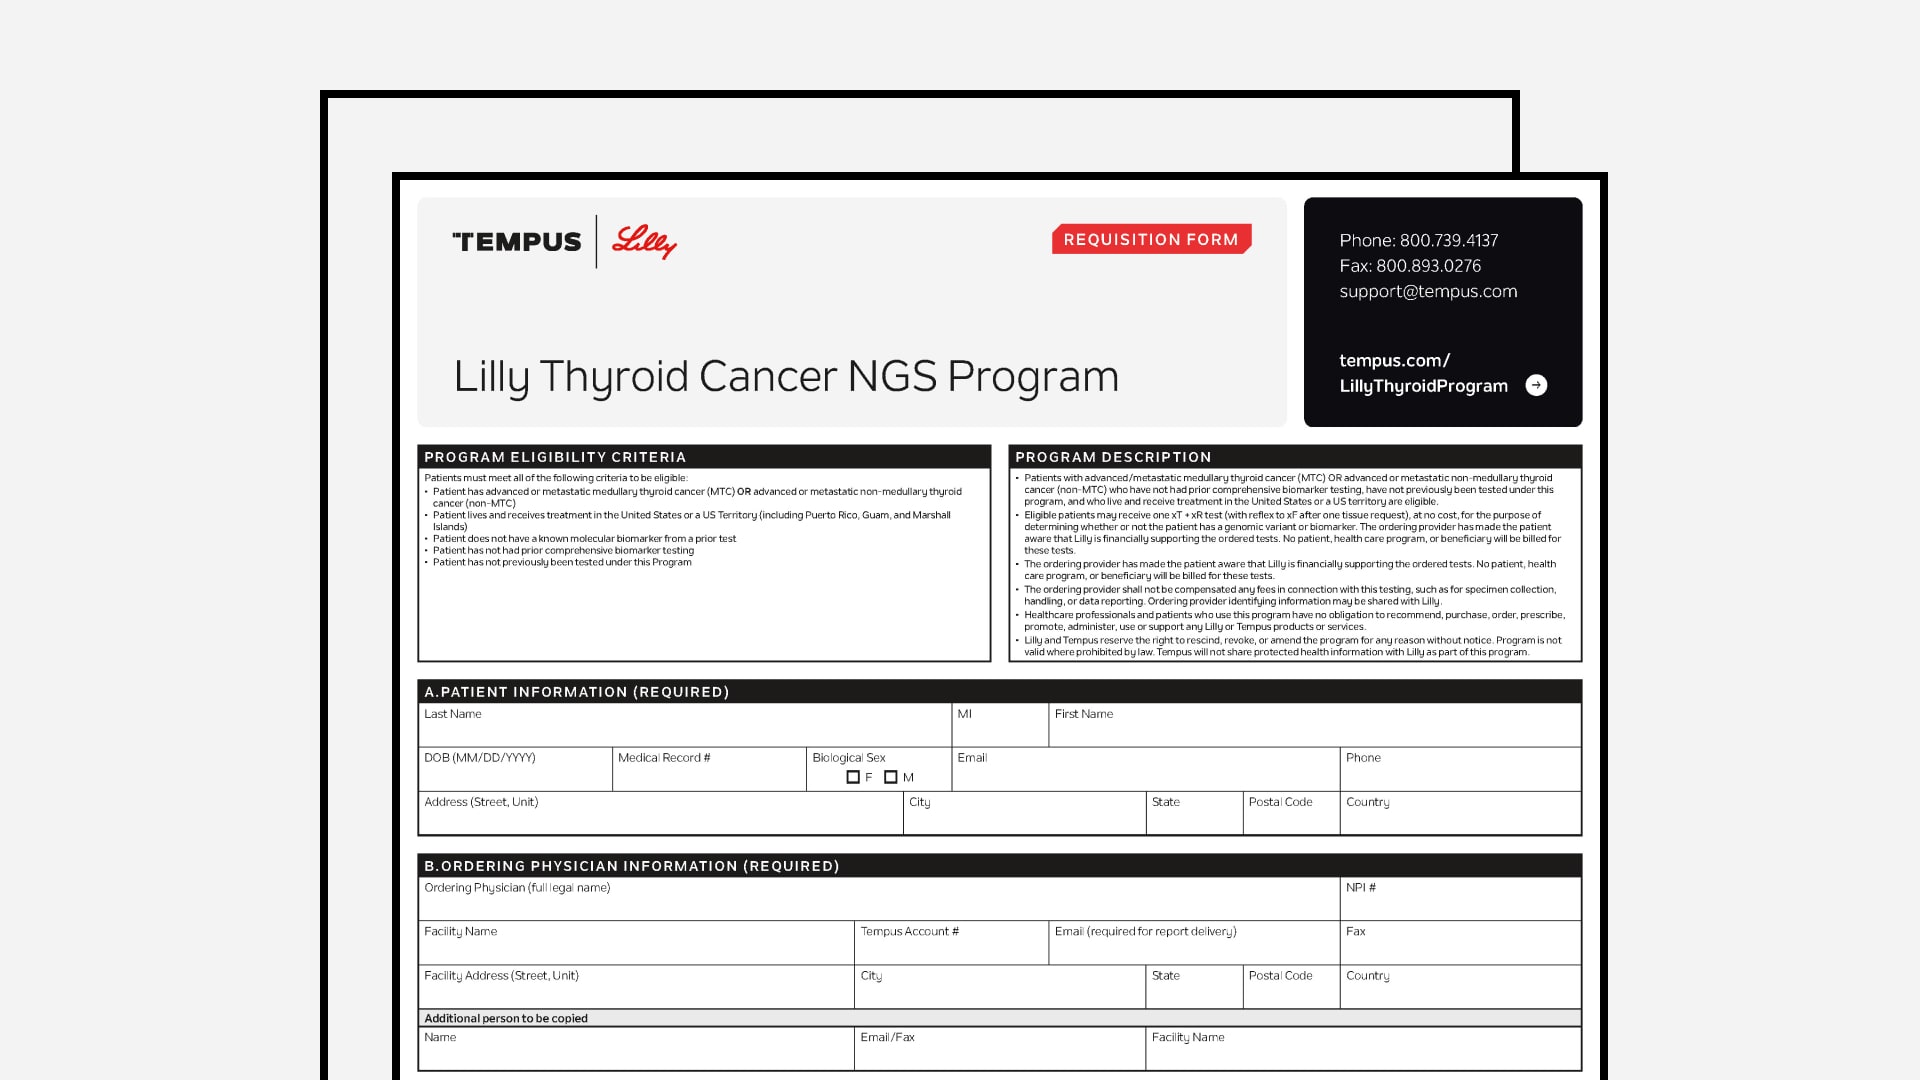 Requisition Form (Lilly Thyroid Program)